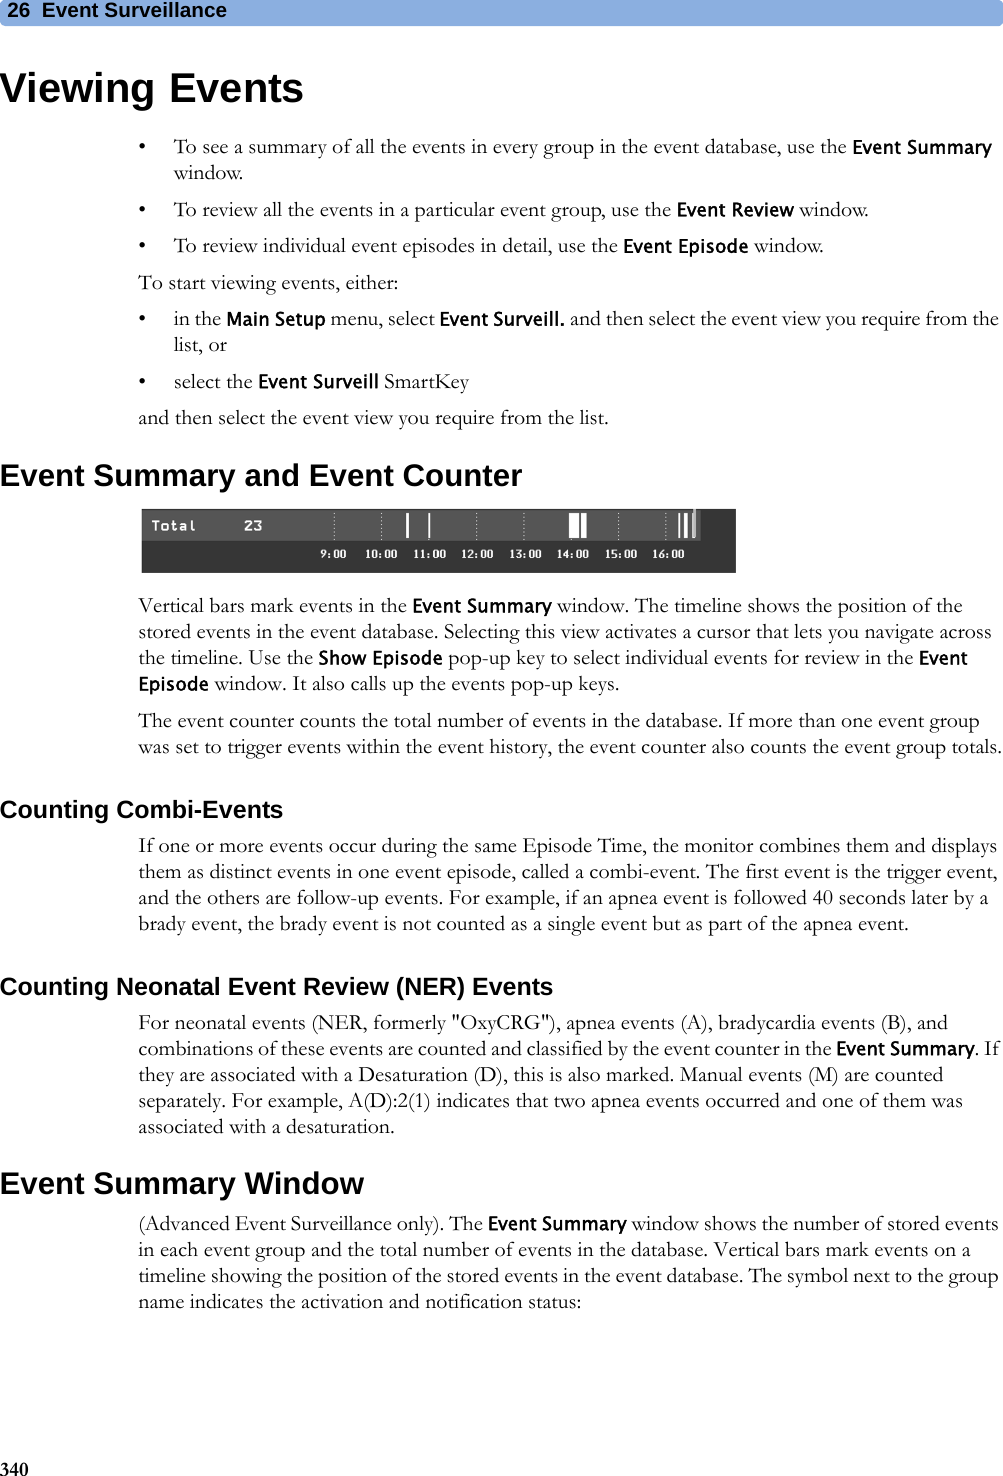 26 Event Surveillance340Viewing Events• To see a summary of all the events in every group in the event database, use the Event Summary window.• To review all the events in a particular event group, use the Event Review window.• To review individual event episodes in detail, use the Event Episode window.To start viewing events, either:•in the Main Setup menu, select Event Surveill. and then select the event view you require from the list, or• select the Event Surveill SmartKeyand then select the event view you require from the list.Event Summary and Event CounterVertical bars mark events in the Event Summary window. The timeline shows the position of the stored events in the event database. Selecting this view activates a cursor that lets you navigate across the timeline. Use the Show Episode pop-up key to select individual events for review in the Event Episode window. It also calls up the events pop-up keys.The event counter counts the total number of events in the database. If more than one event group was set to trigger events within the event history, the event counter also counts the event group totals.Counting Combi-EventsIf one or more events occur during the same Episode Time, the monitor combines them and displays them as distinct events in one event episode, called a combi-event. The first event is the trigger event, and the others are follow-up events. For example, if an apnea event is followed 40 seconds later by a brady event, the brady event is not counted as a single event but as part of the apnea event.Counting Neonatal Event Review (NER) EventsFor neonatal events (NER, formerly &quot;OxyCRG&quot;), apnea events (A), bradycardia events (B), and combinations of these events are counted and classified by the event counter in the Event Summary. If they are associated with a Desaturation (D), this is also marked. Manual events (M) are counted separately. For example, A(D):2(1) indicates that two apnea events occurred and one of them was associated with a desaturation.Event Summary Window(Advanced Event Surveillance only). The Event Summary window shows the number of stored events in each event group and the total number of events in the database. Vertical bars mark events on a timeline showing the position of the stored events in the event database. The symbol next to the group name indicates the activation and notification status: